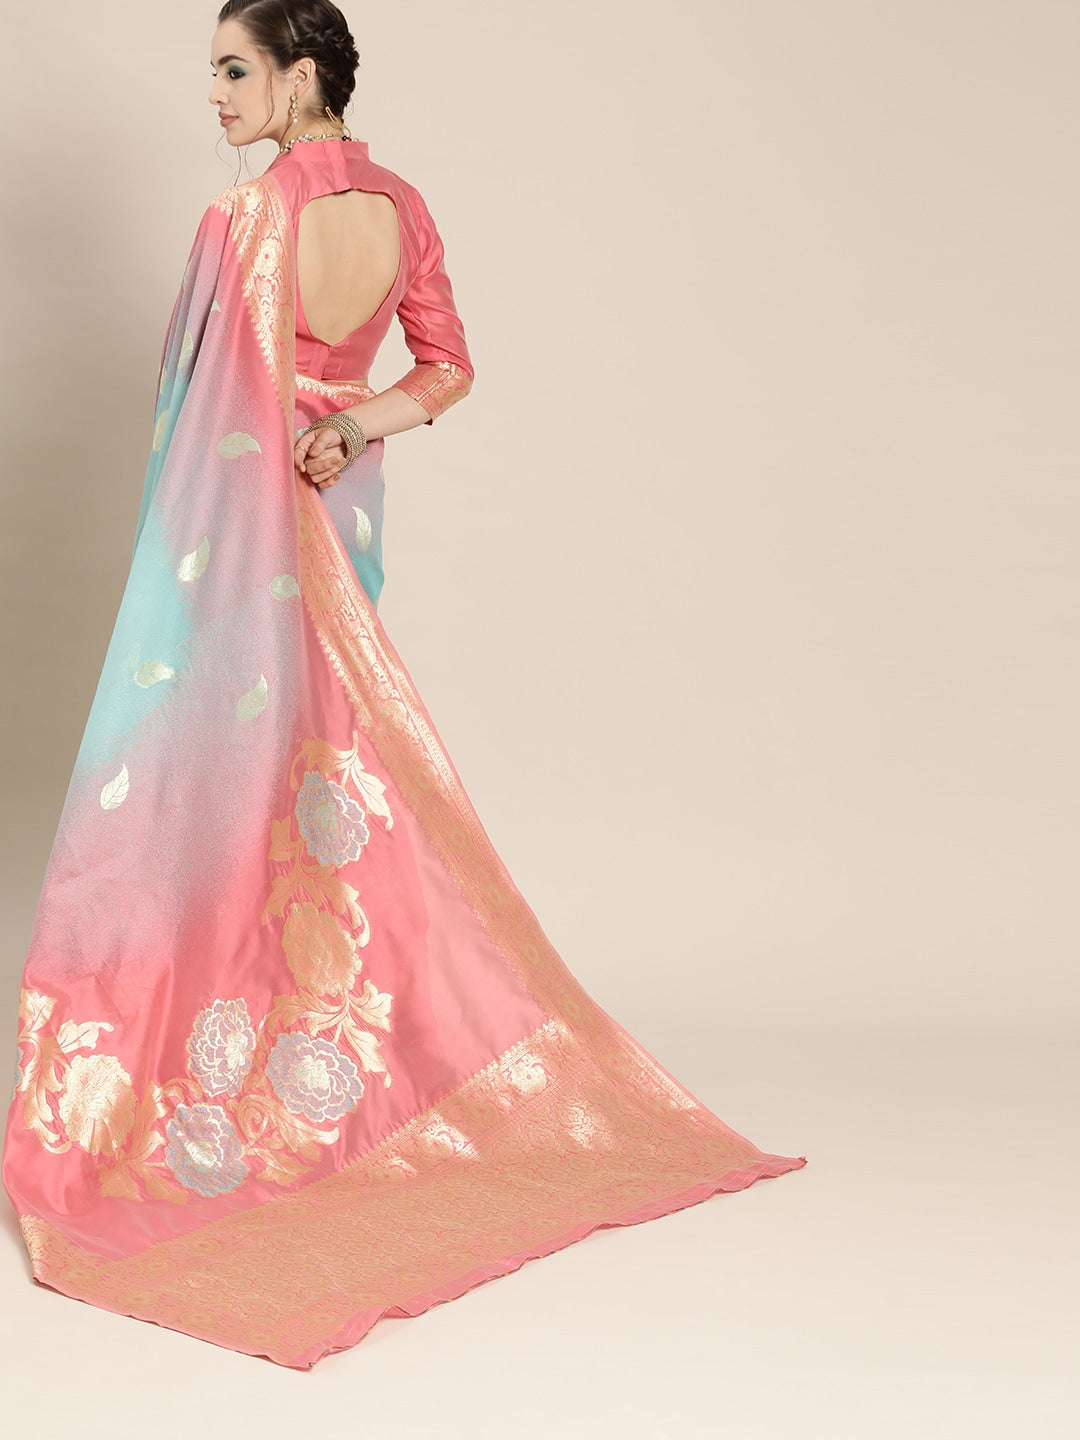 Pink Dyed Banarasi Saree - Indian Clothing in Denver, CO, Aurora, CO, Boulder, CO, Fort Collins, CO, Colorado Springs, CO, Parker, CO, Highlands Ranch, CO, Cherry Creek, CO, Centennial, CO, and Longmont, CO. Nationwide shipping USA - India Fashion X